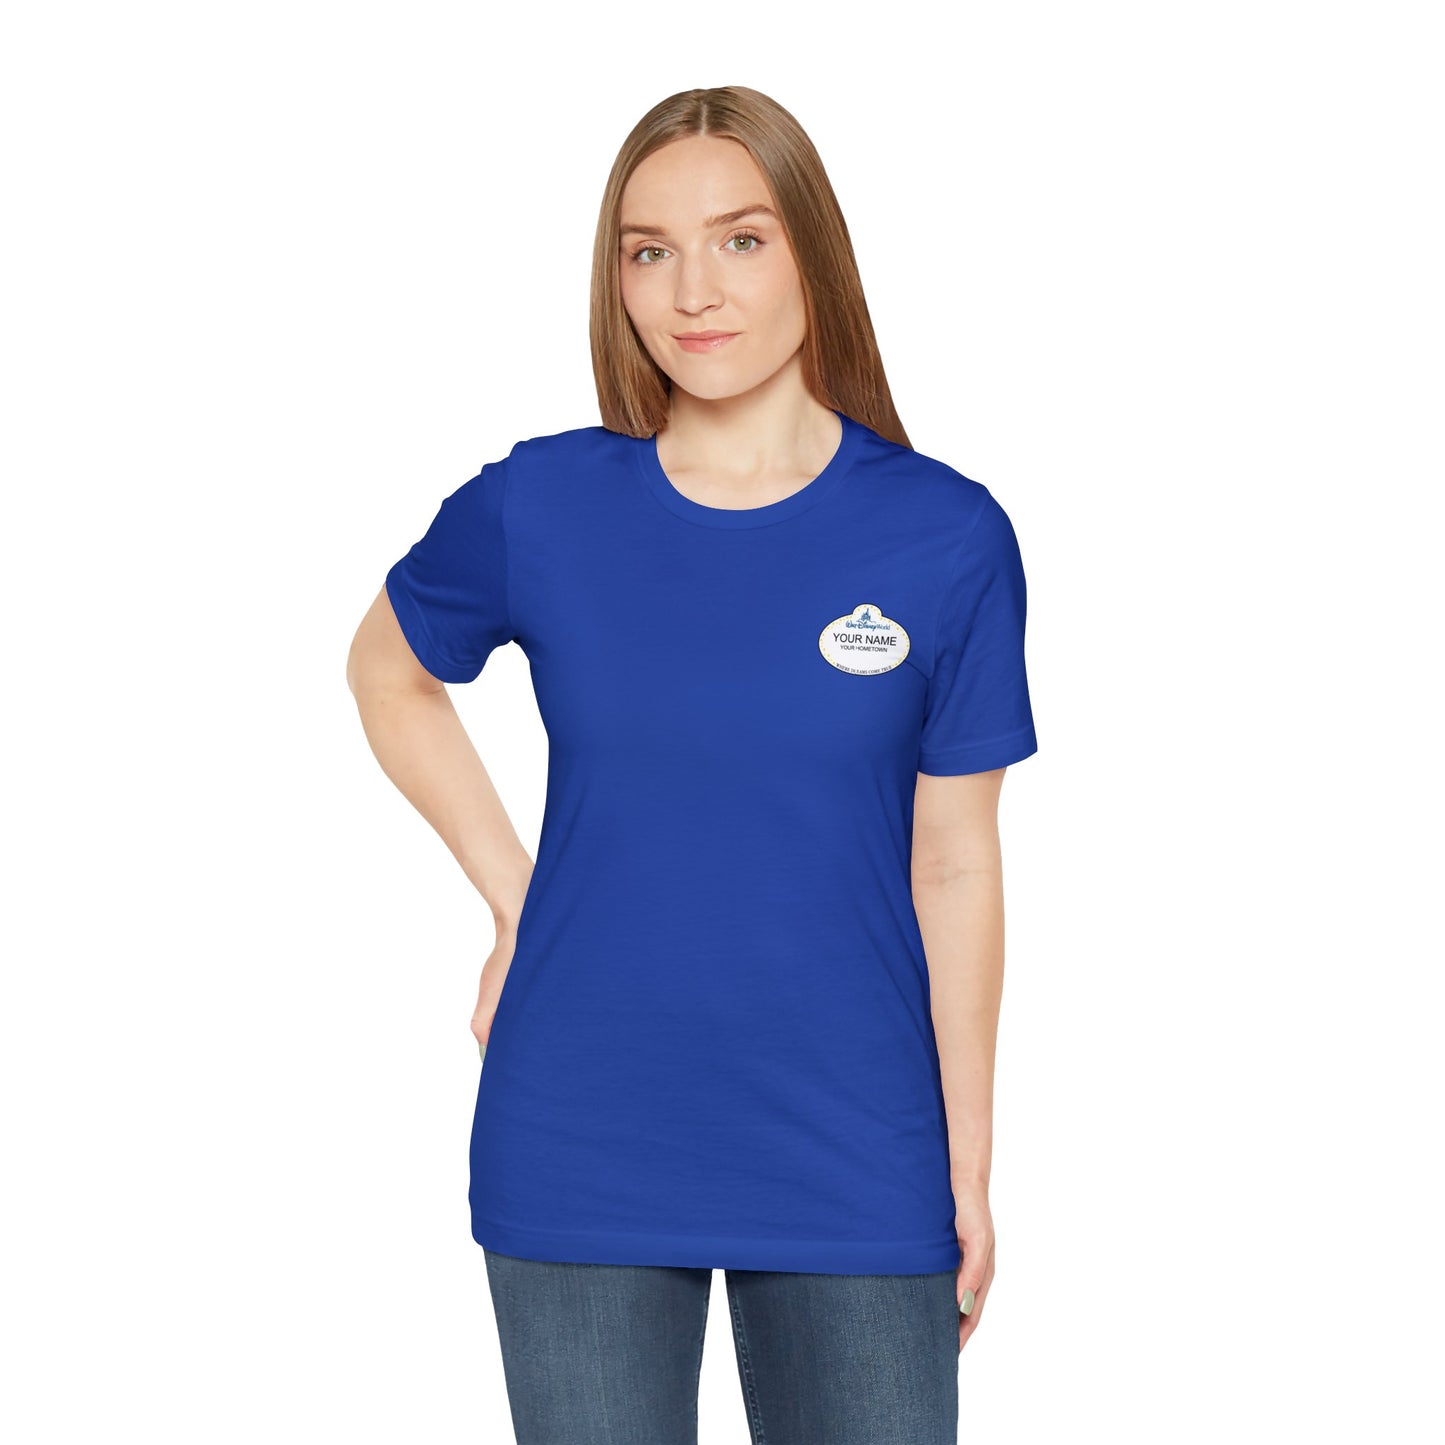 Customizable Name Tag Unisex Graphic Tee - Multiple Colors